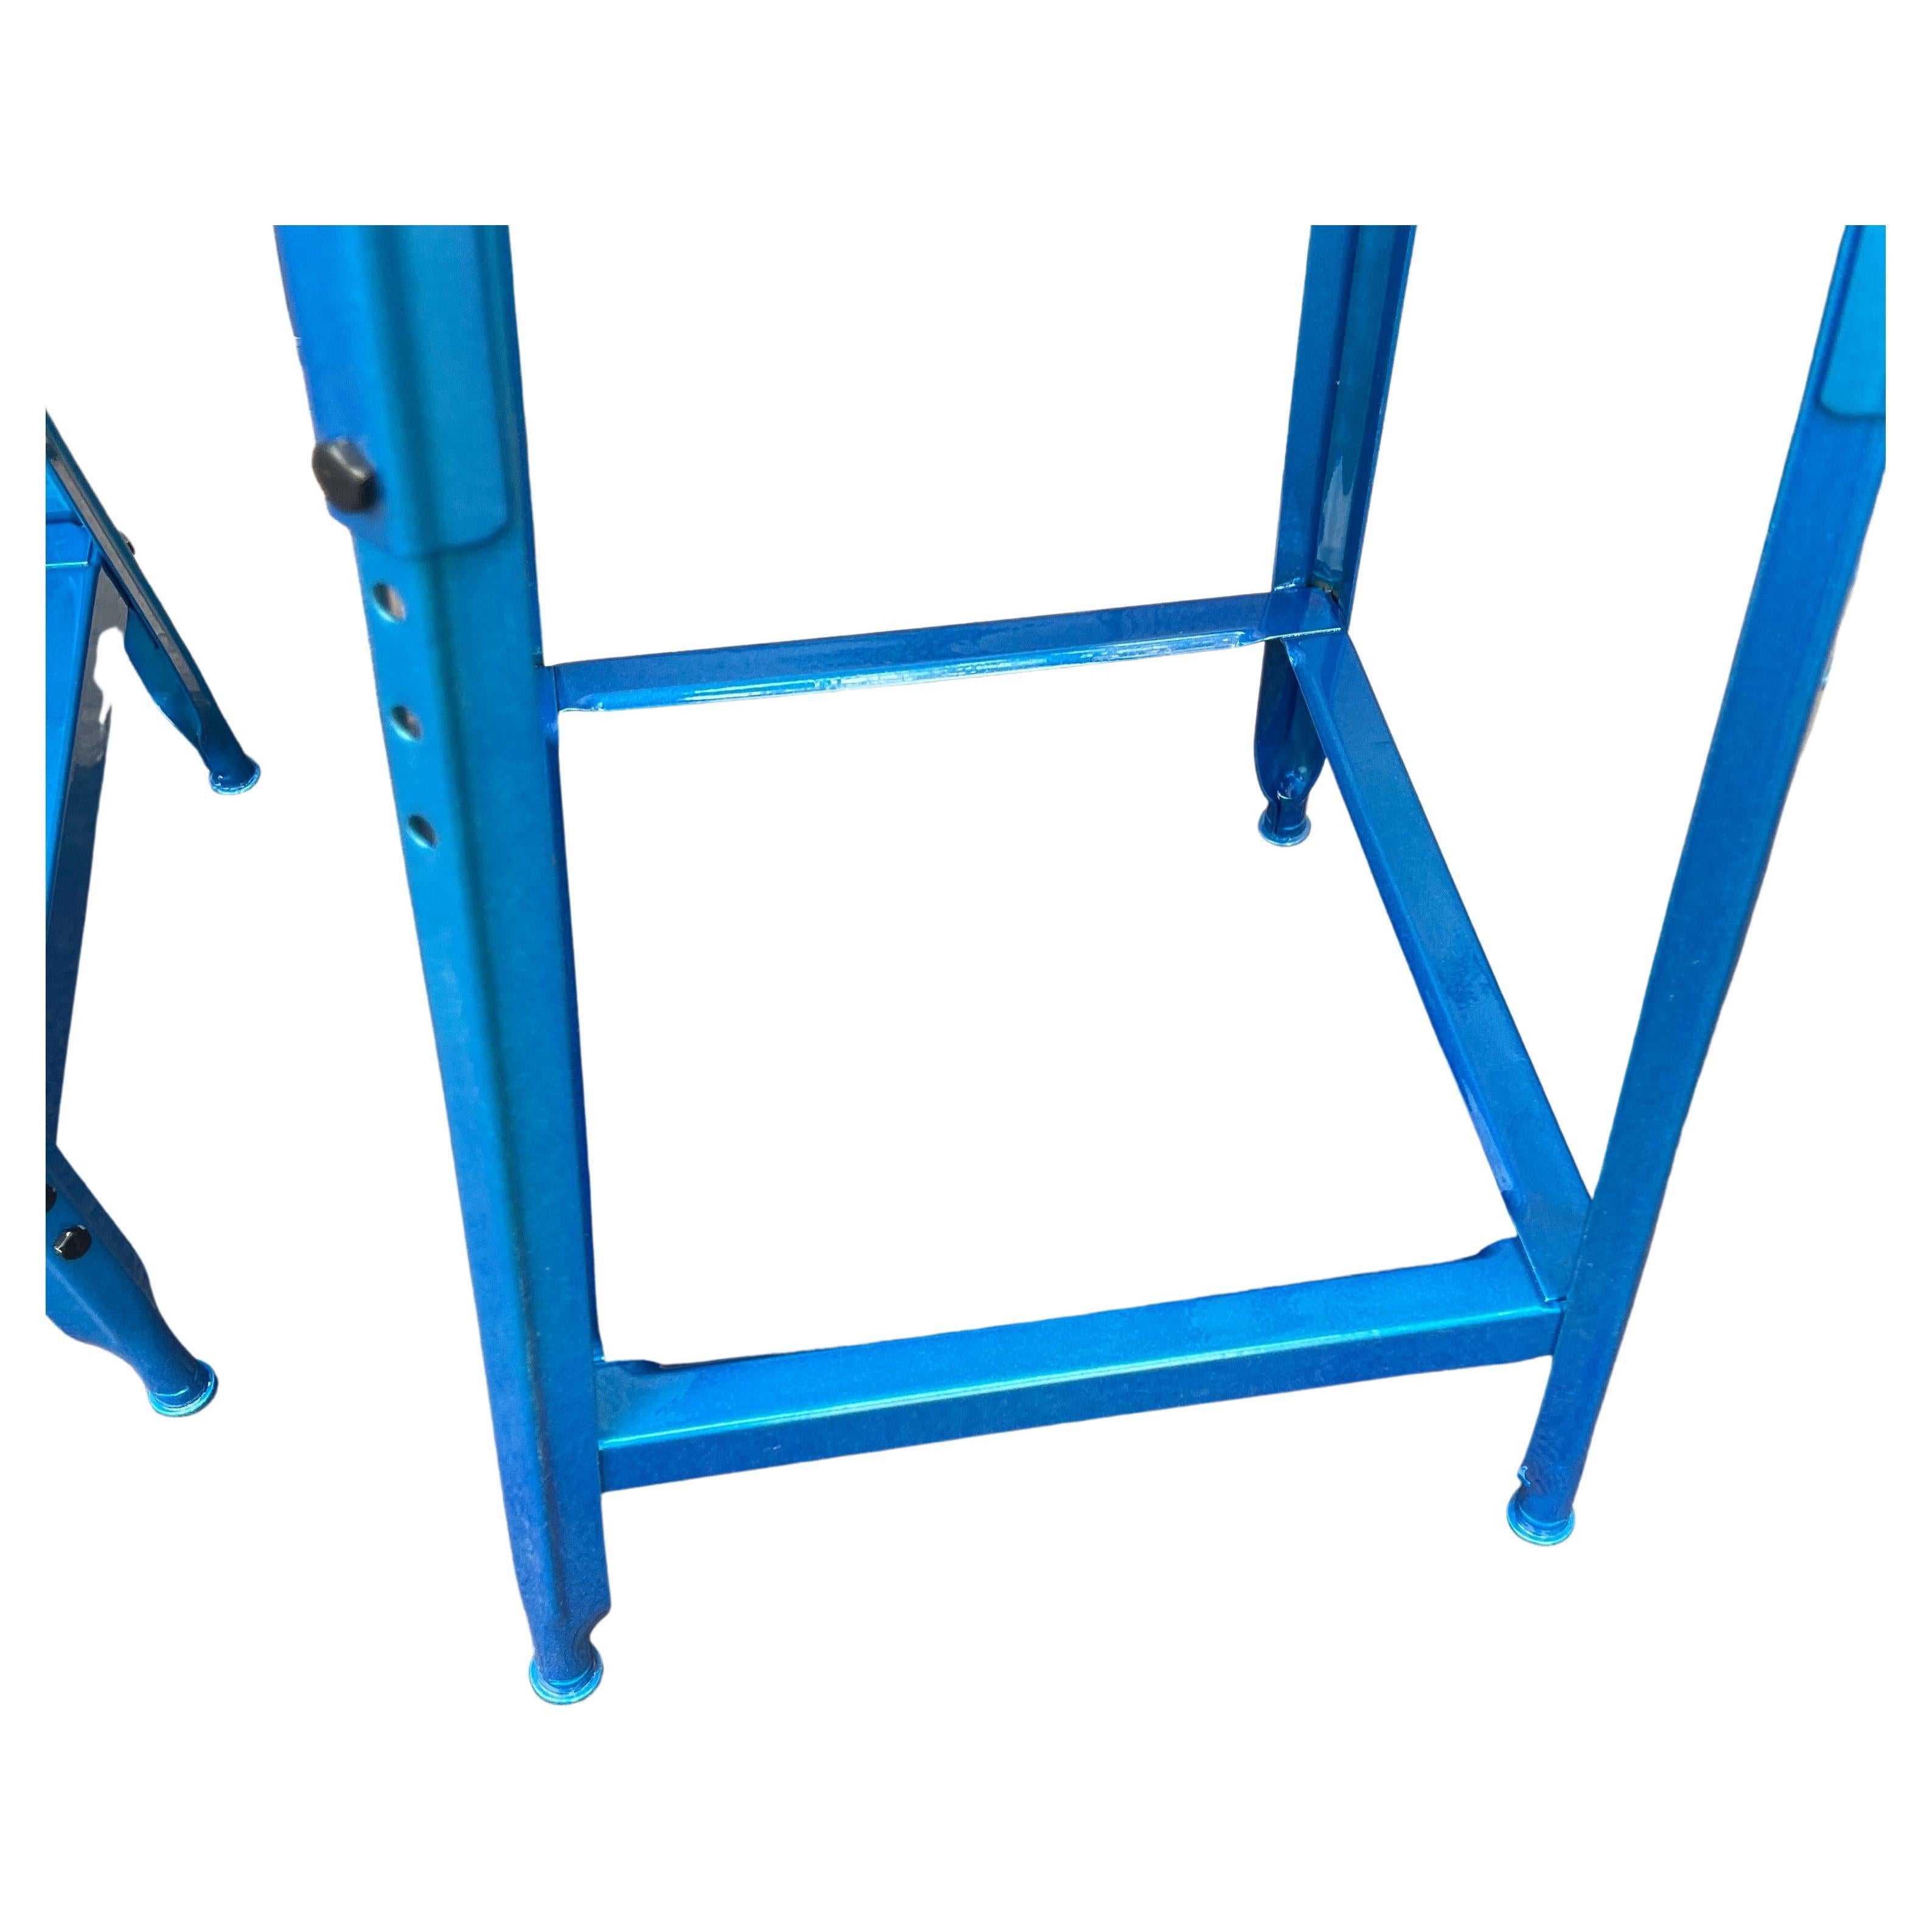 Set of Two Heavy Industrial Bar Stools in Powder Coated Blue For Sale 6